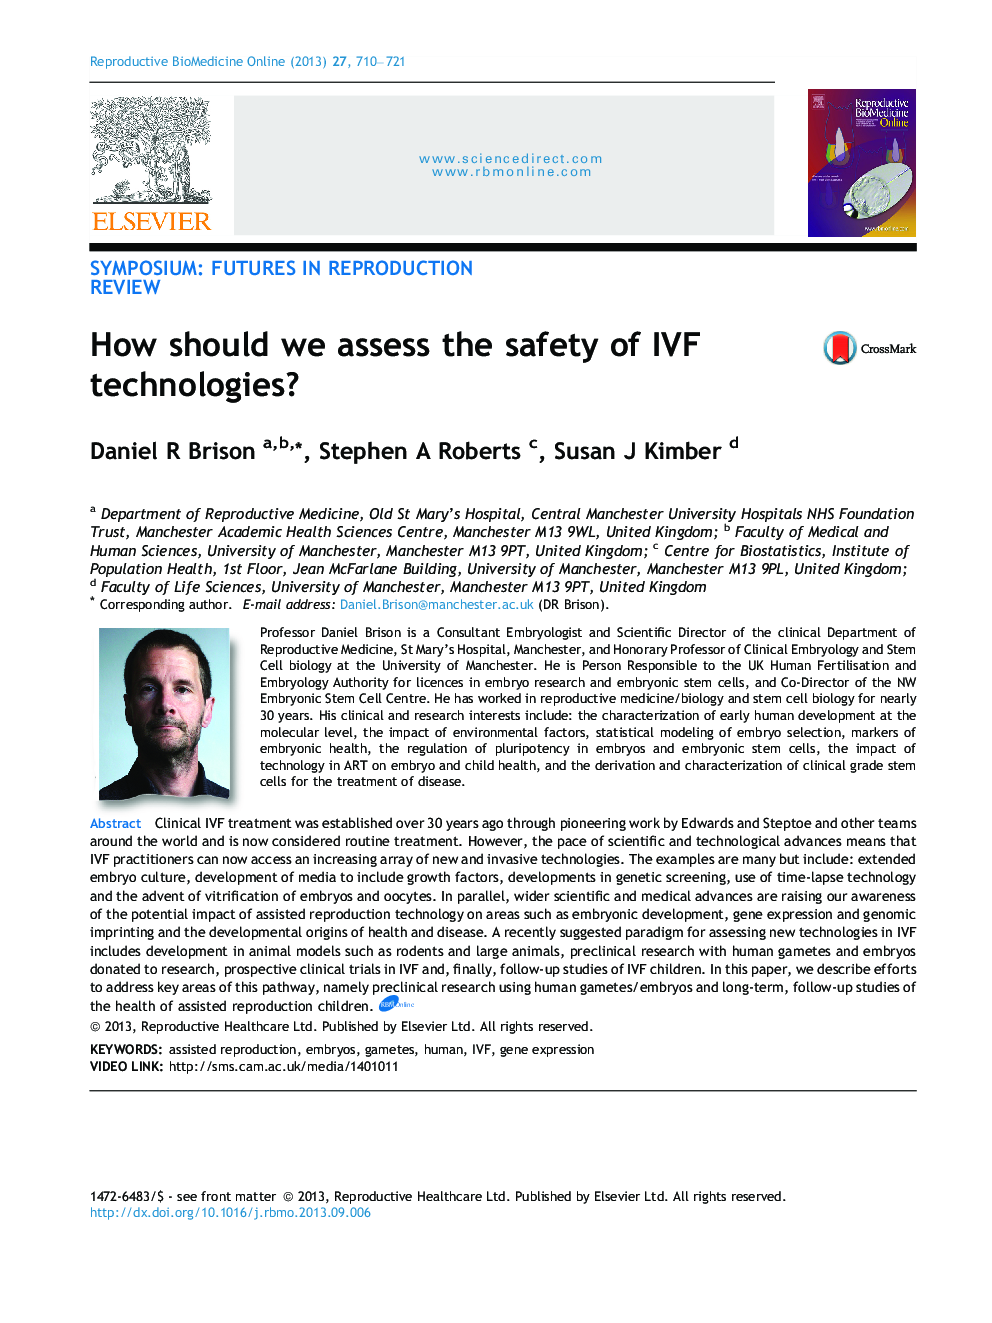 How should we assess the safety of IVF technologies? 